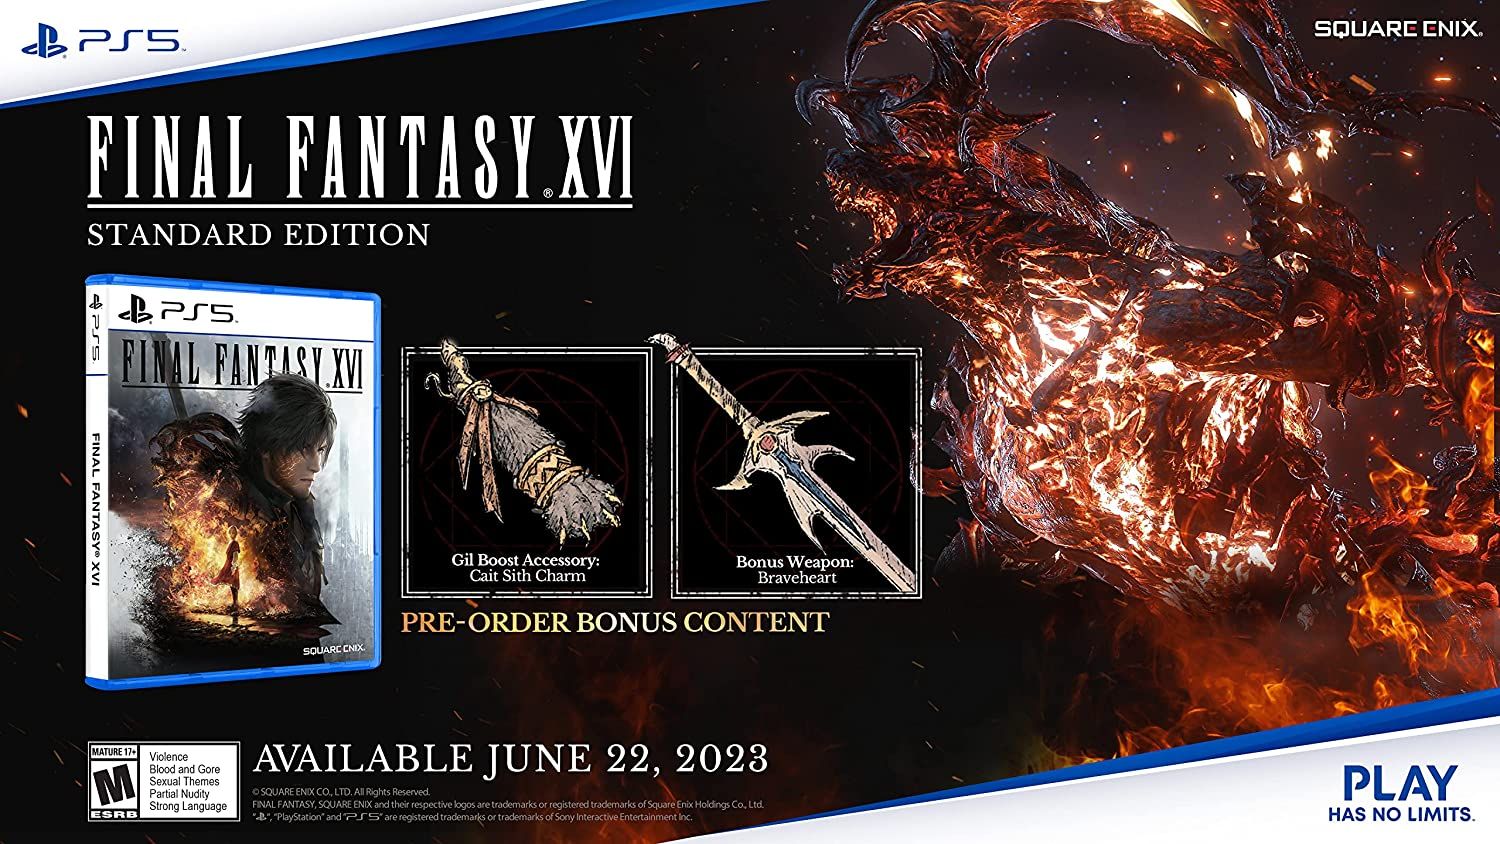 Final Fantasy XVI rumoured to be announced at PS5 event